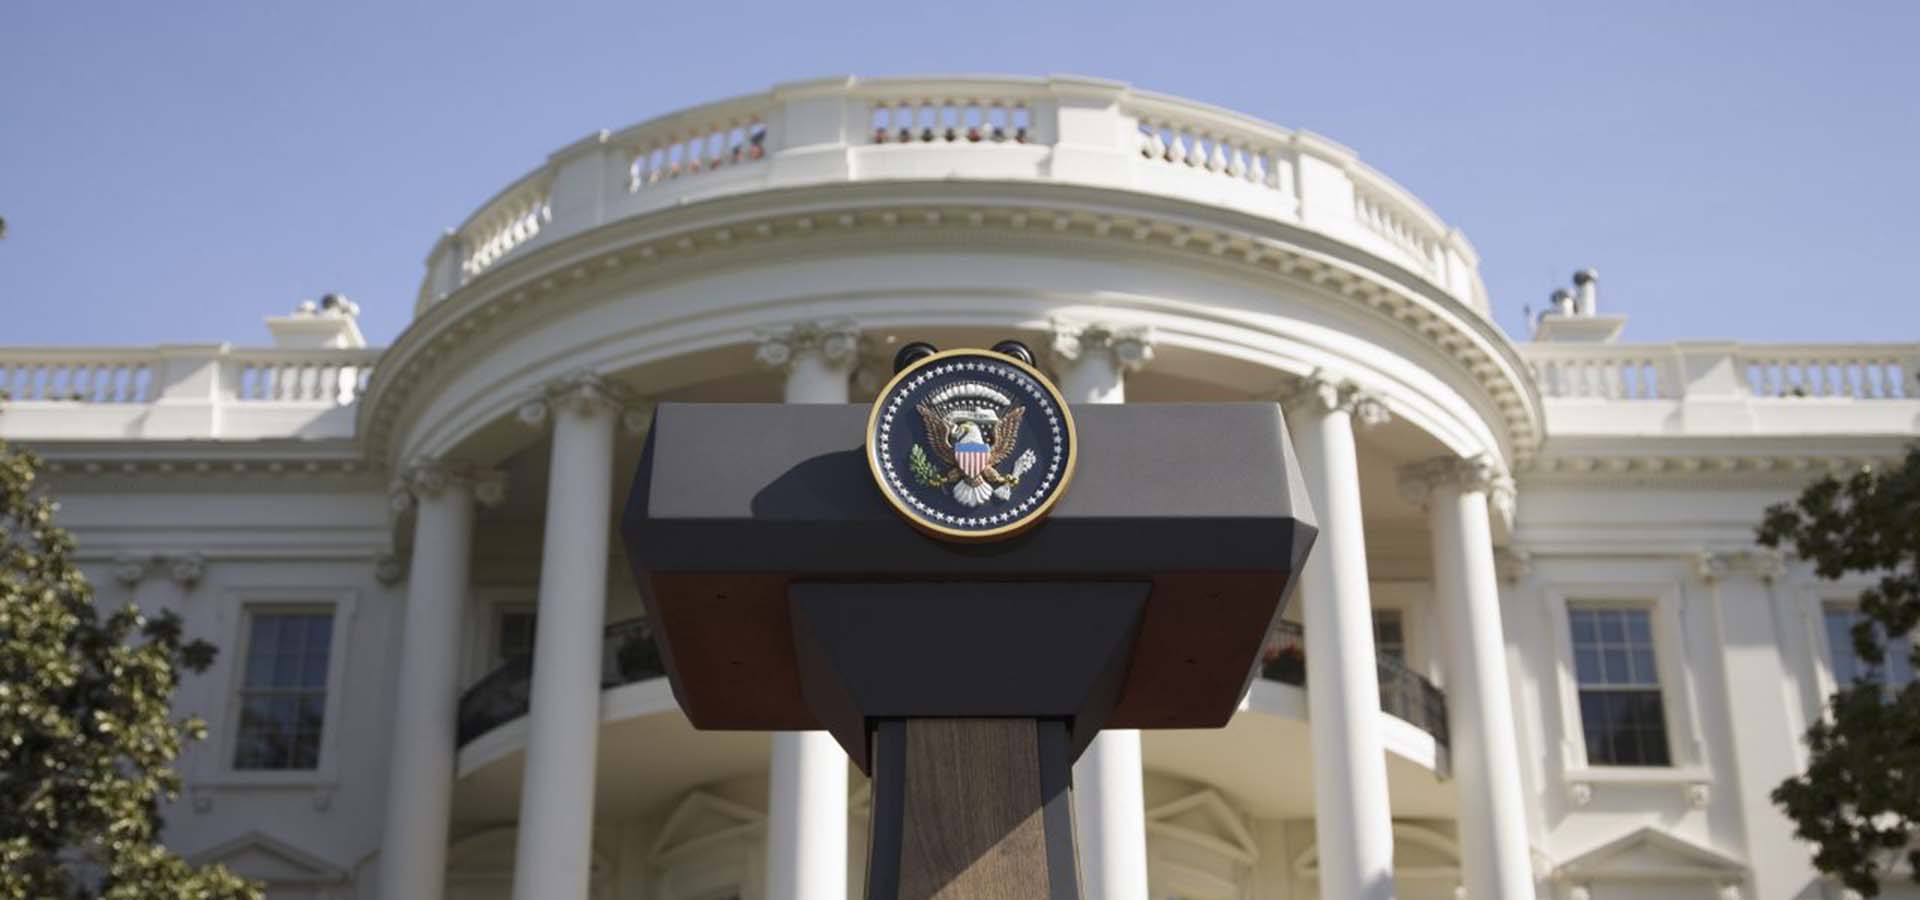 Photo of Presidential podium in front of the White House.